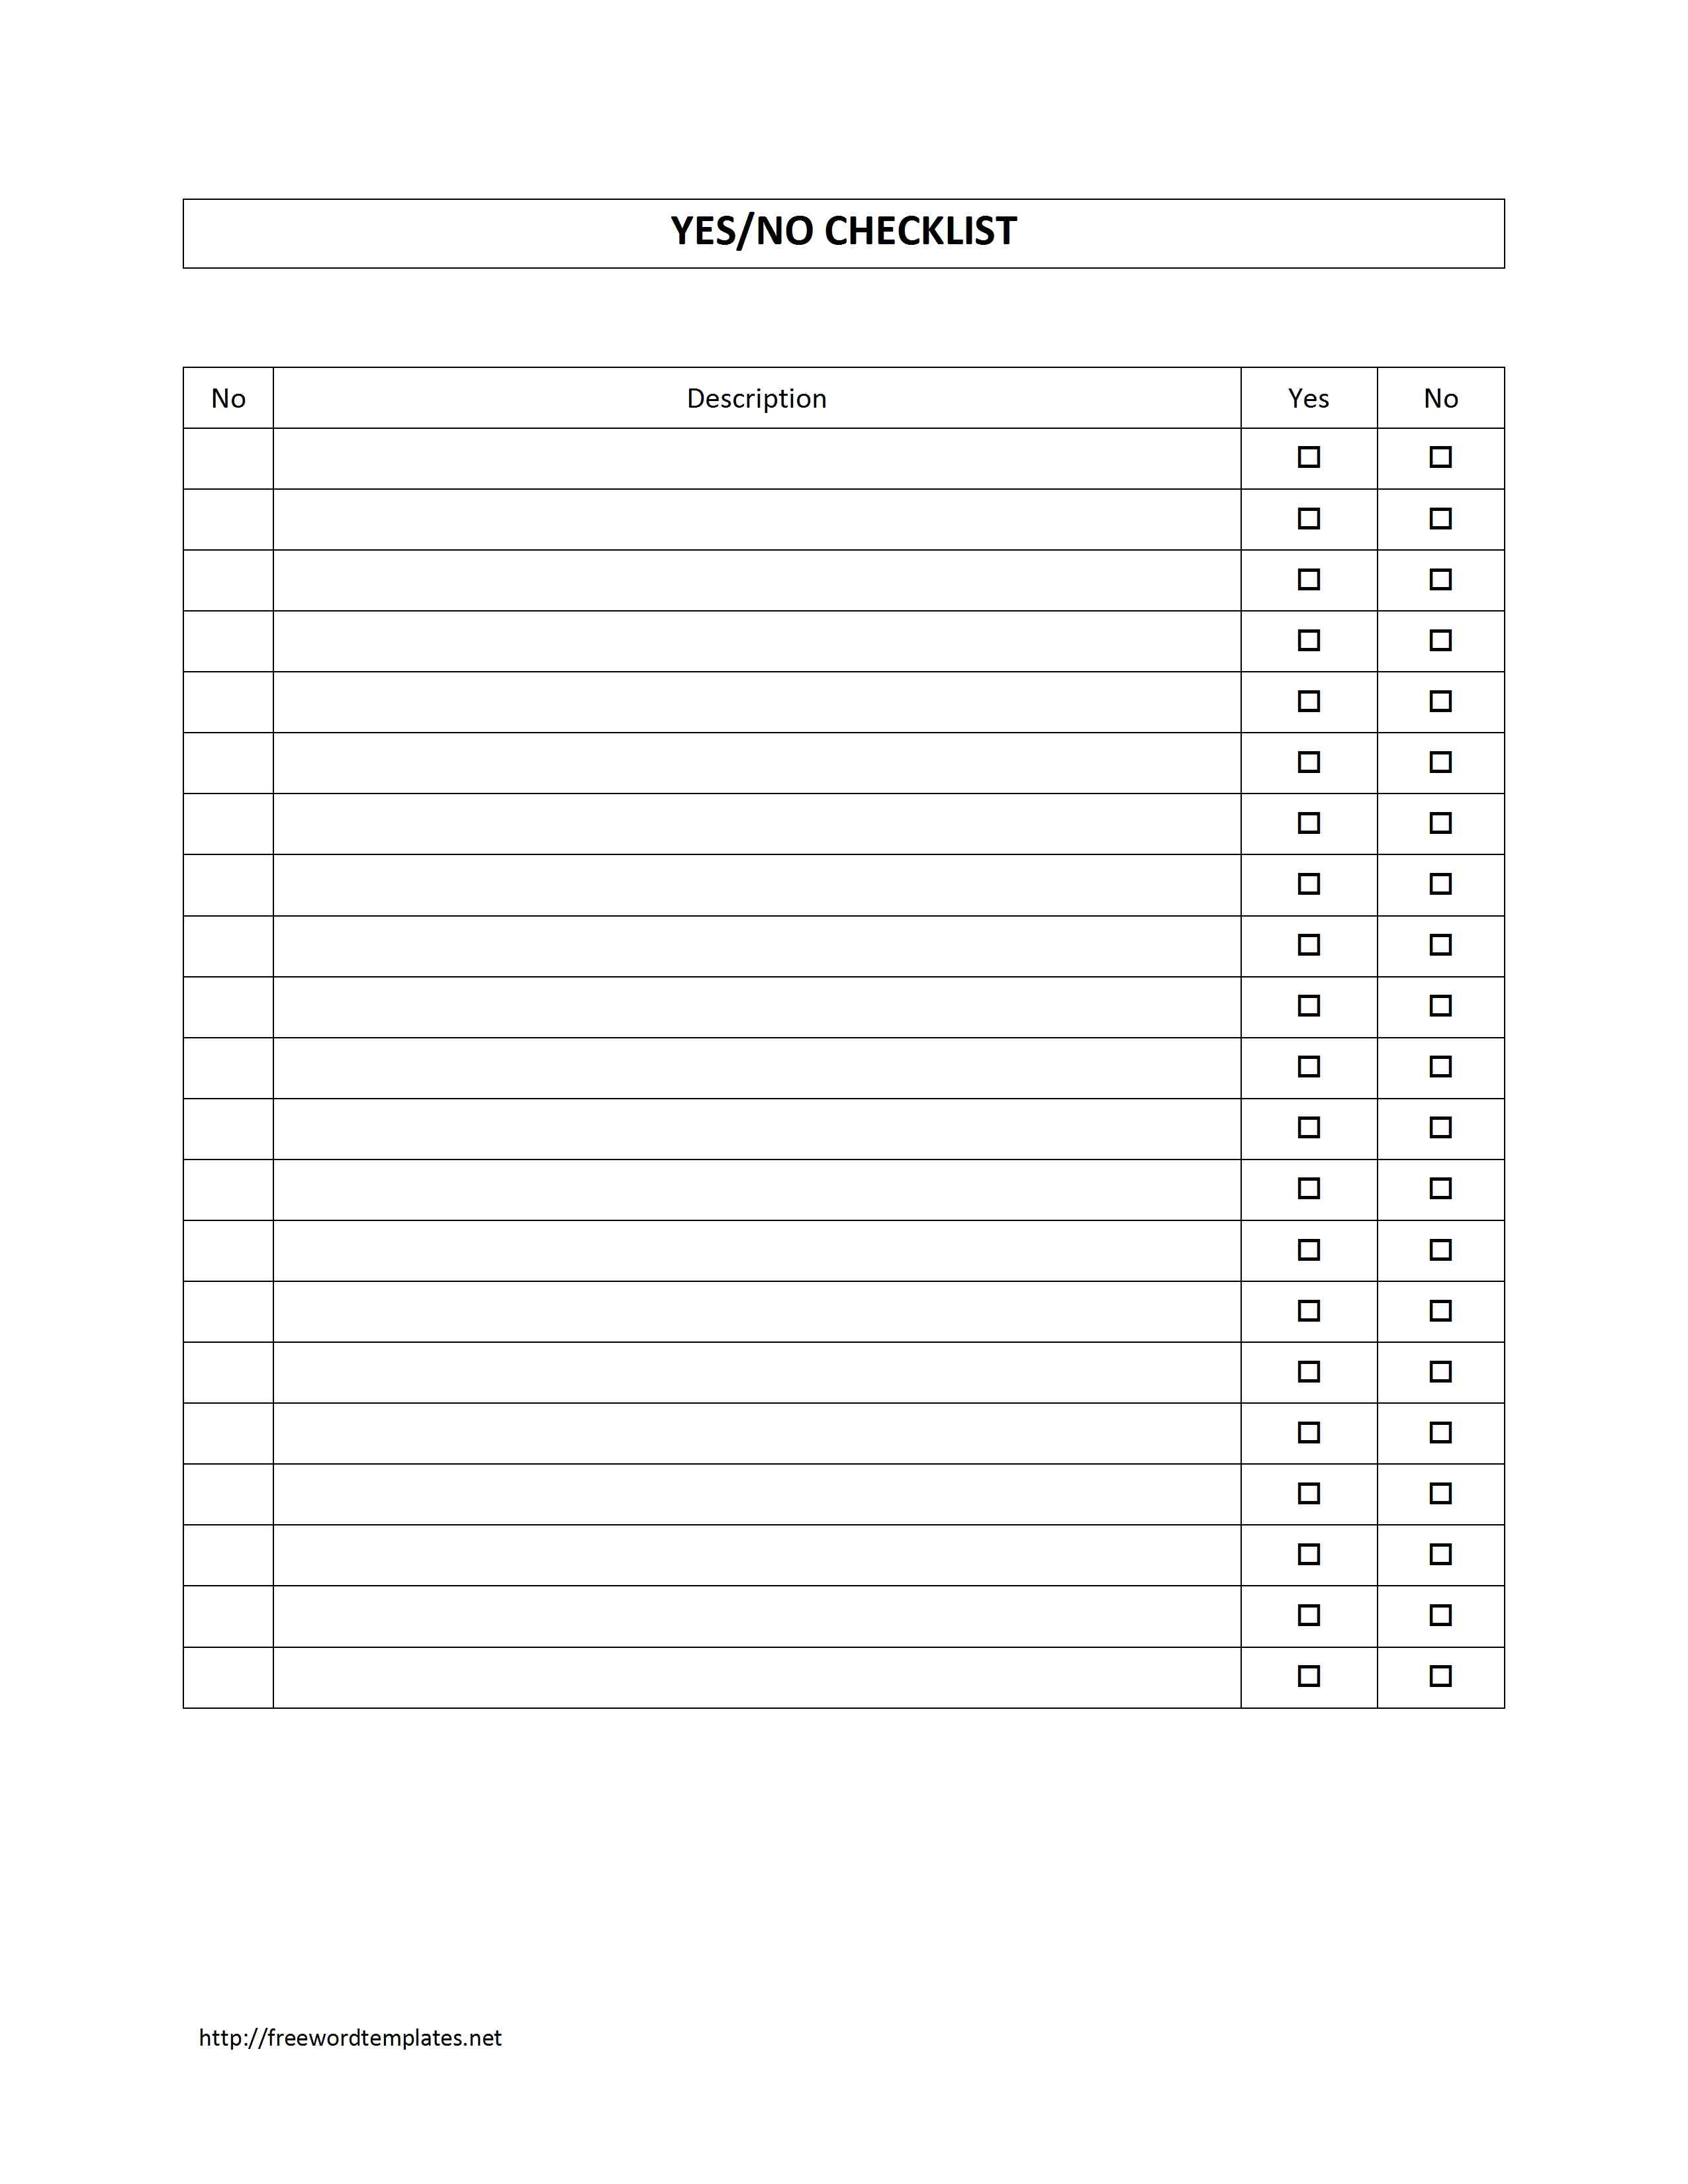 Checklist Template Word 2011 Yes No Survey Word Template